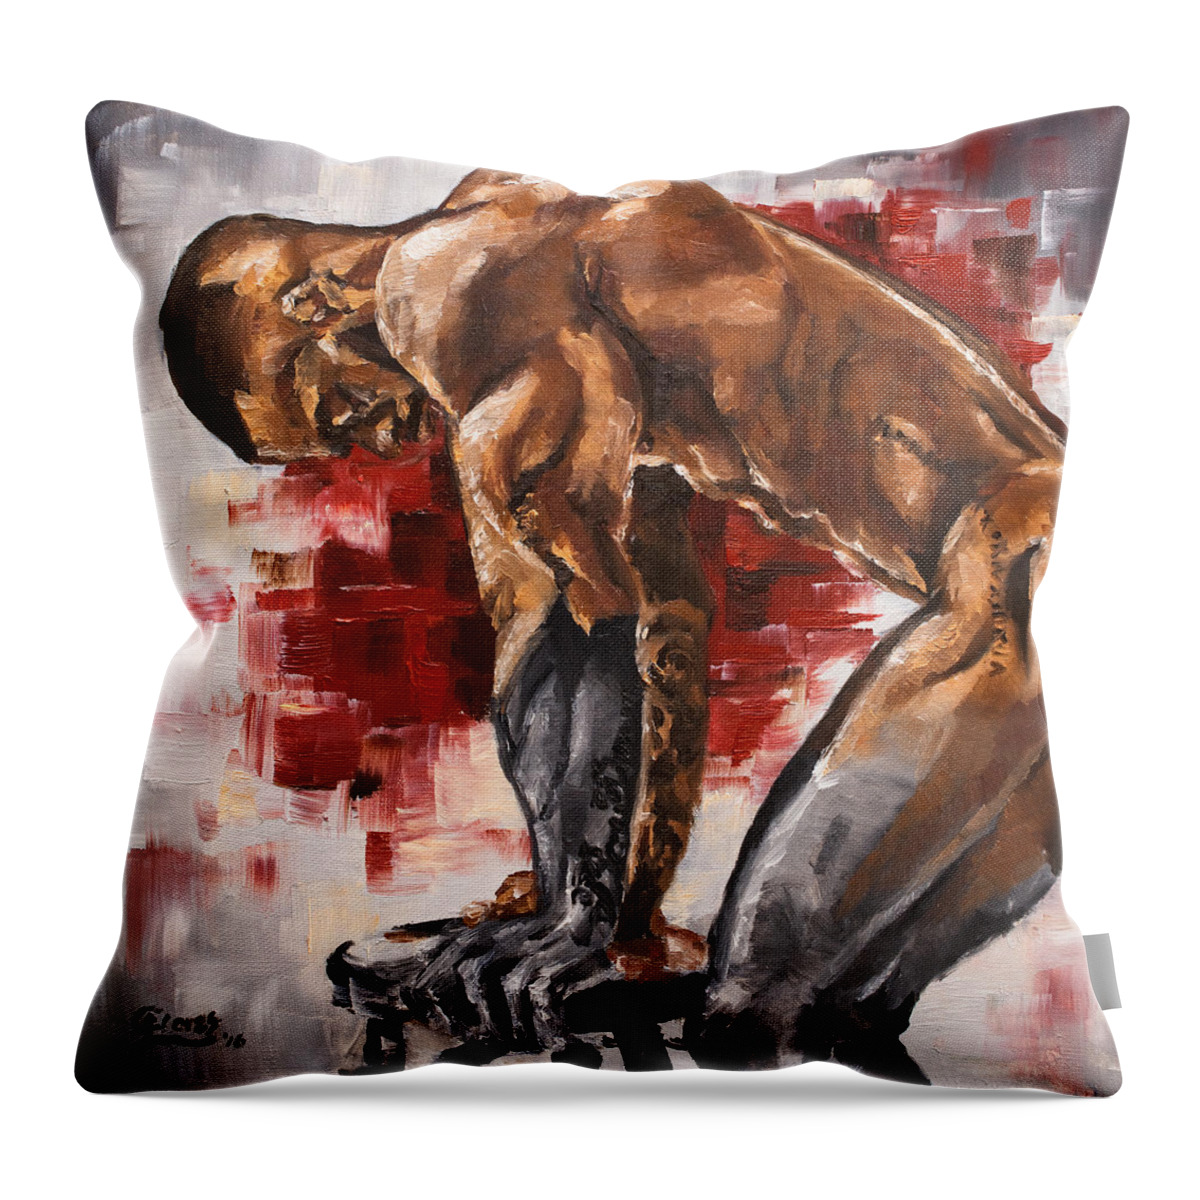 Human Throw Pillow featuring the painting Bow Down and Rise Up by Carlos Flores